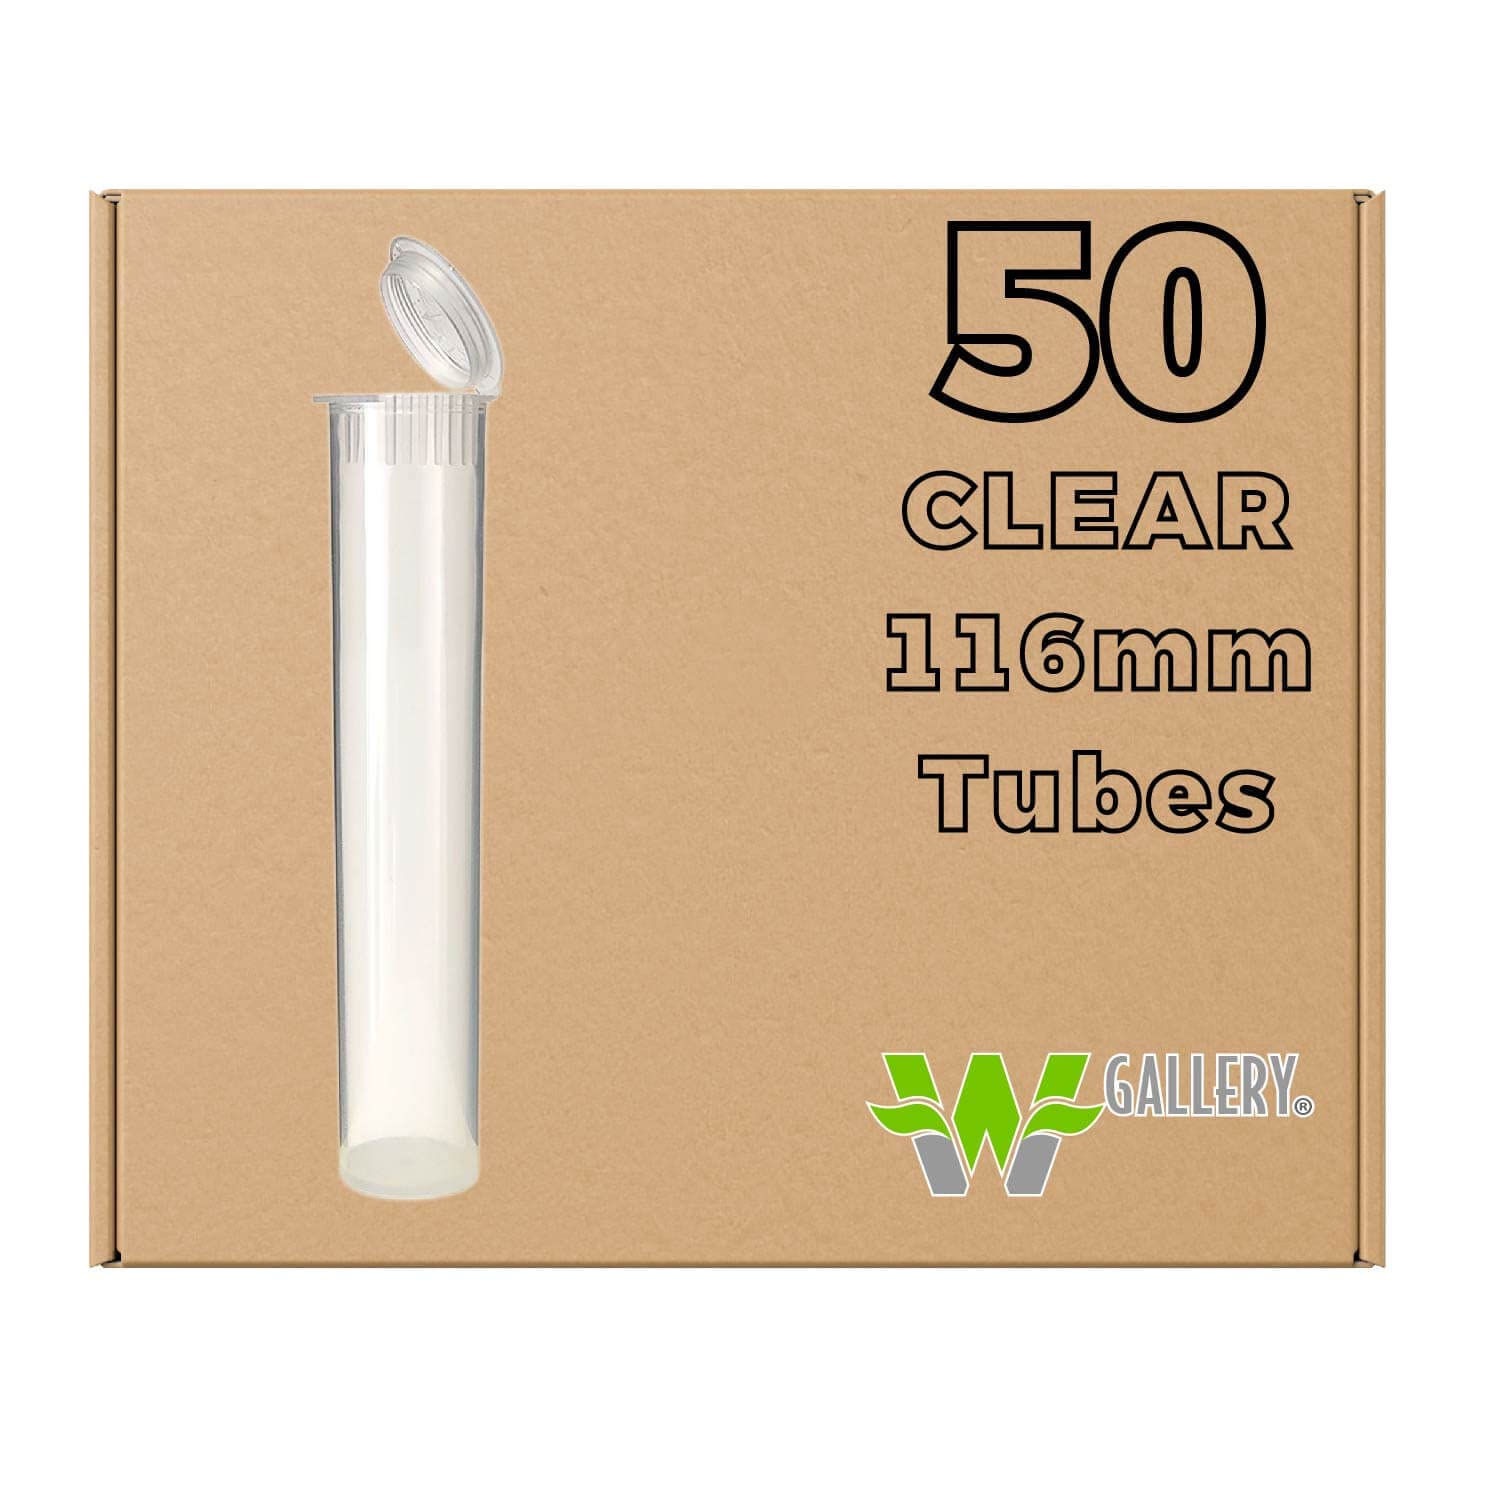 W Gallery 50 Clear 116mm Tubes Pop Top Joint is Open Smell-Proof Pre-Roll  Blunt